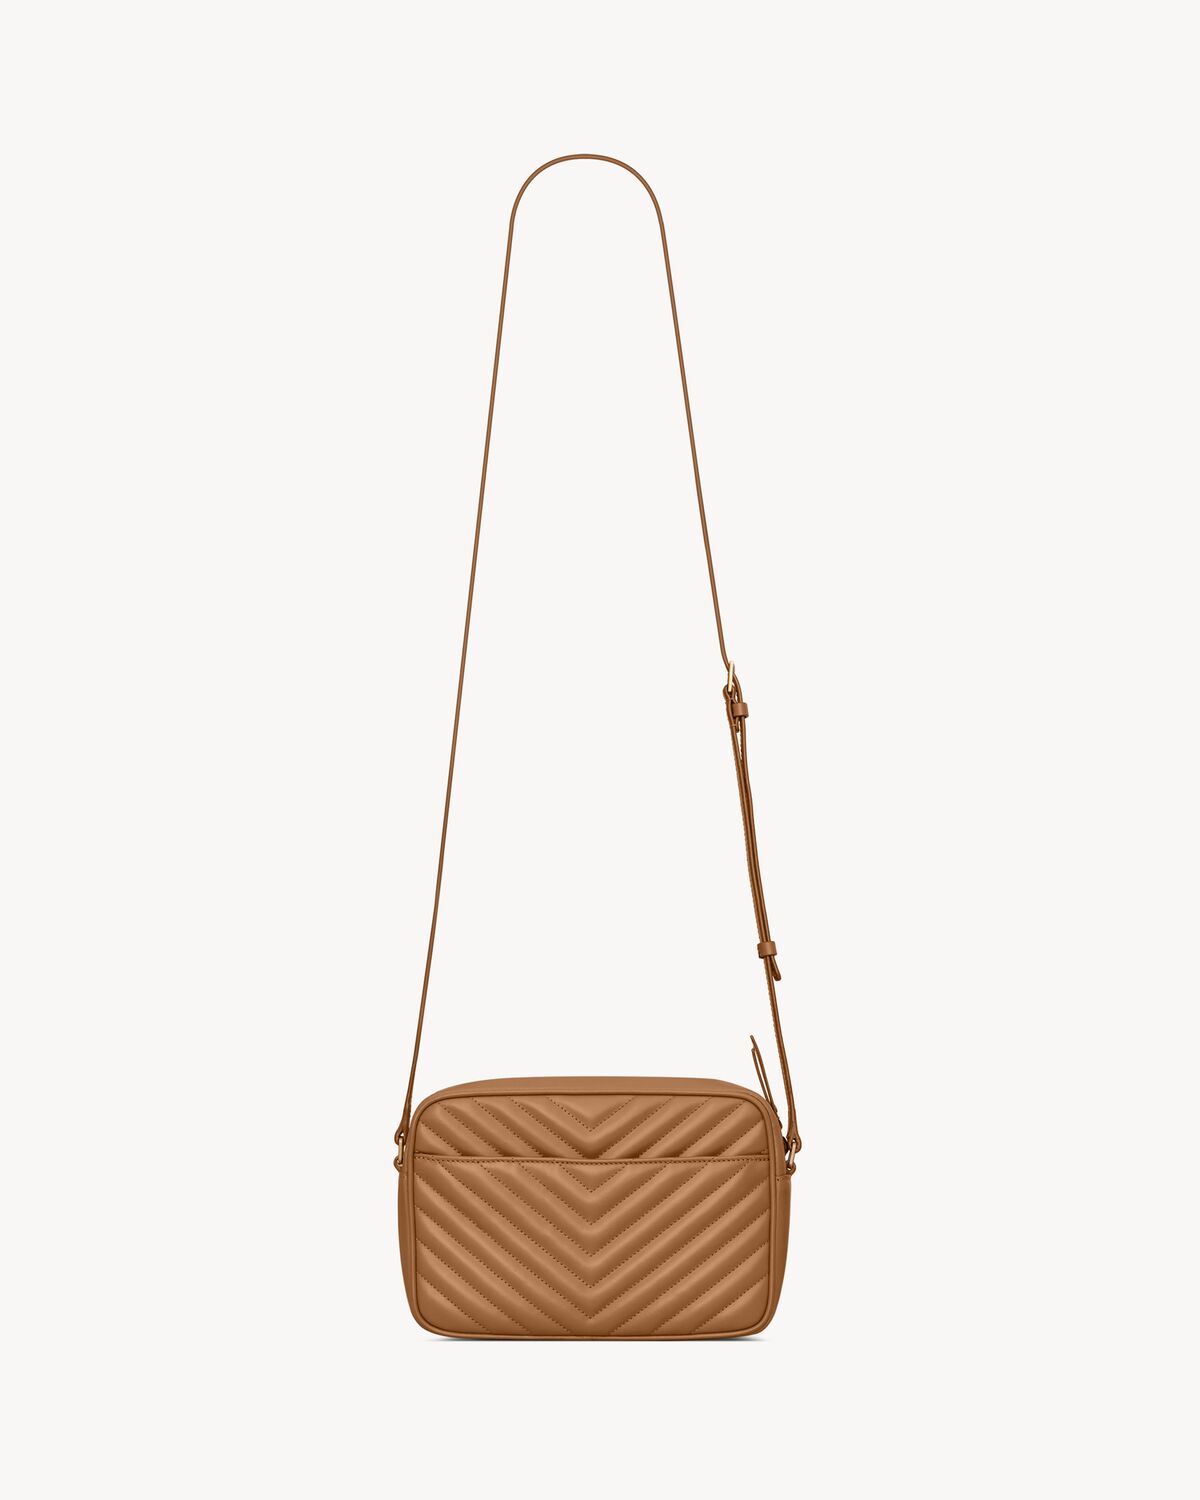 LOU camera bag in quilted leather